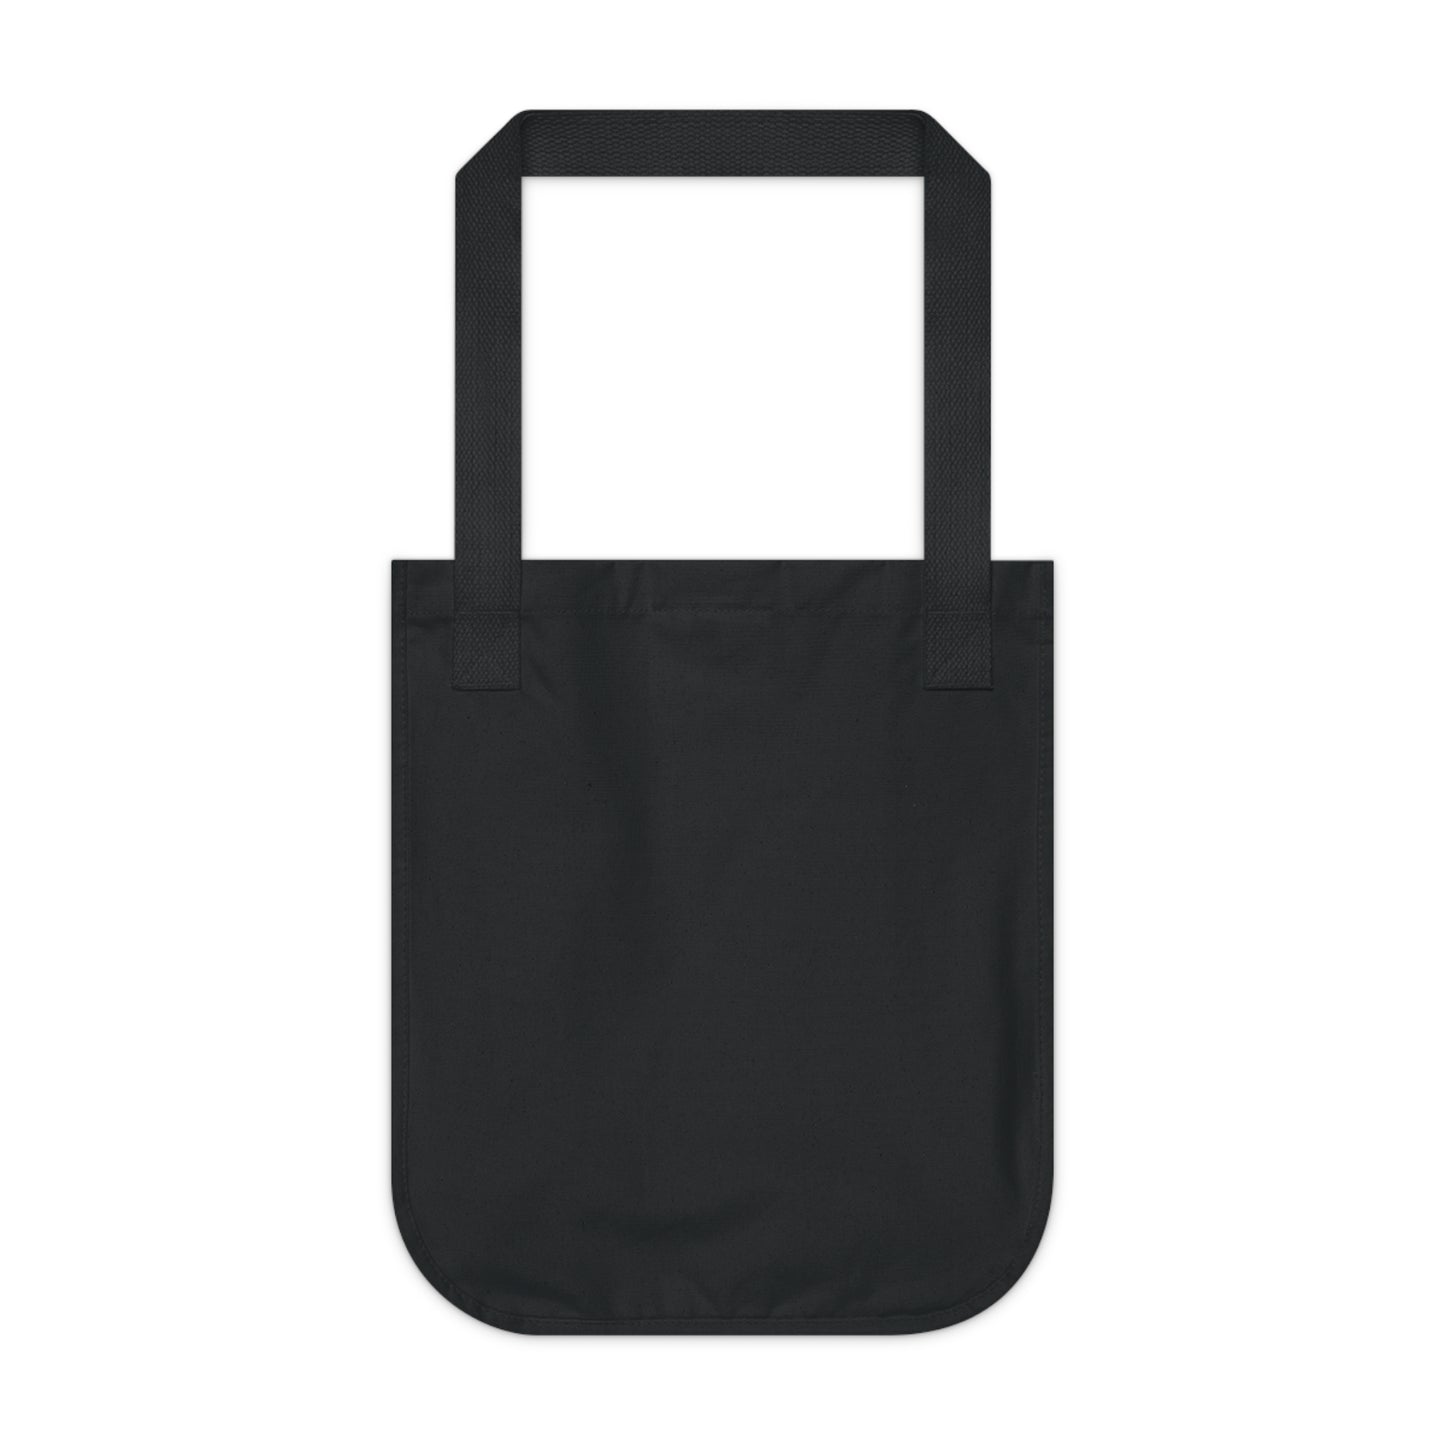 INSPIRED Everything Is Always... Organic Canvas Tote Bag